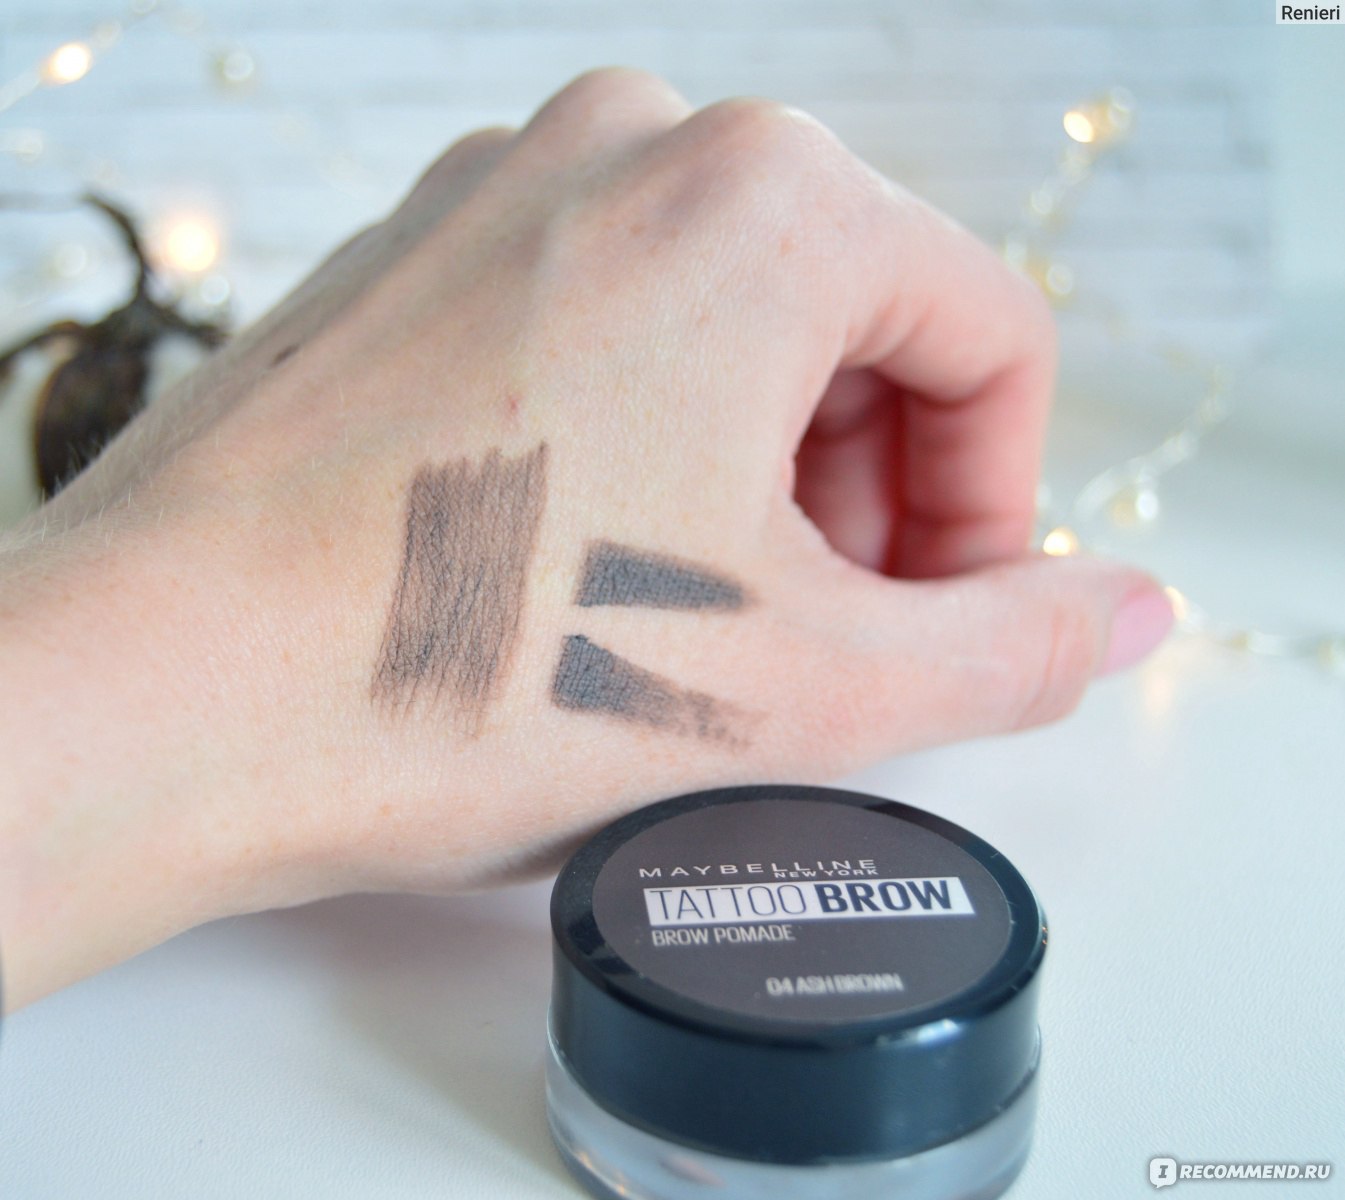 Maybelline Tattoo Brow Pomade Ash Brown